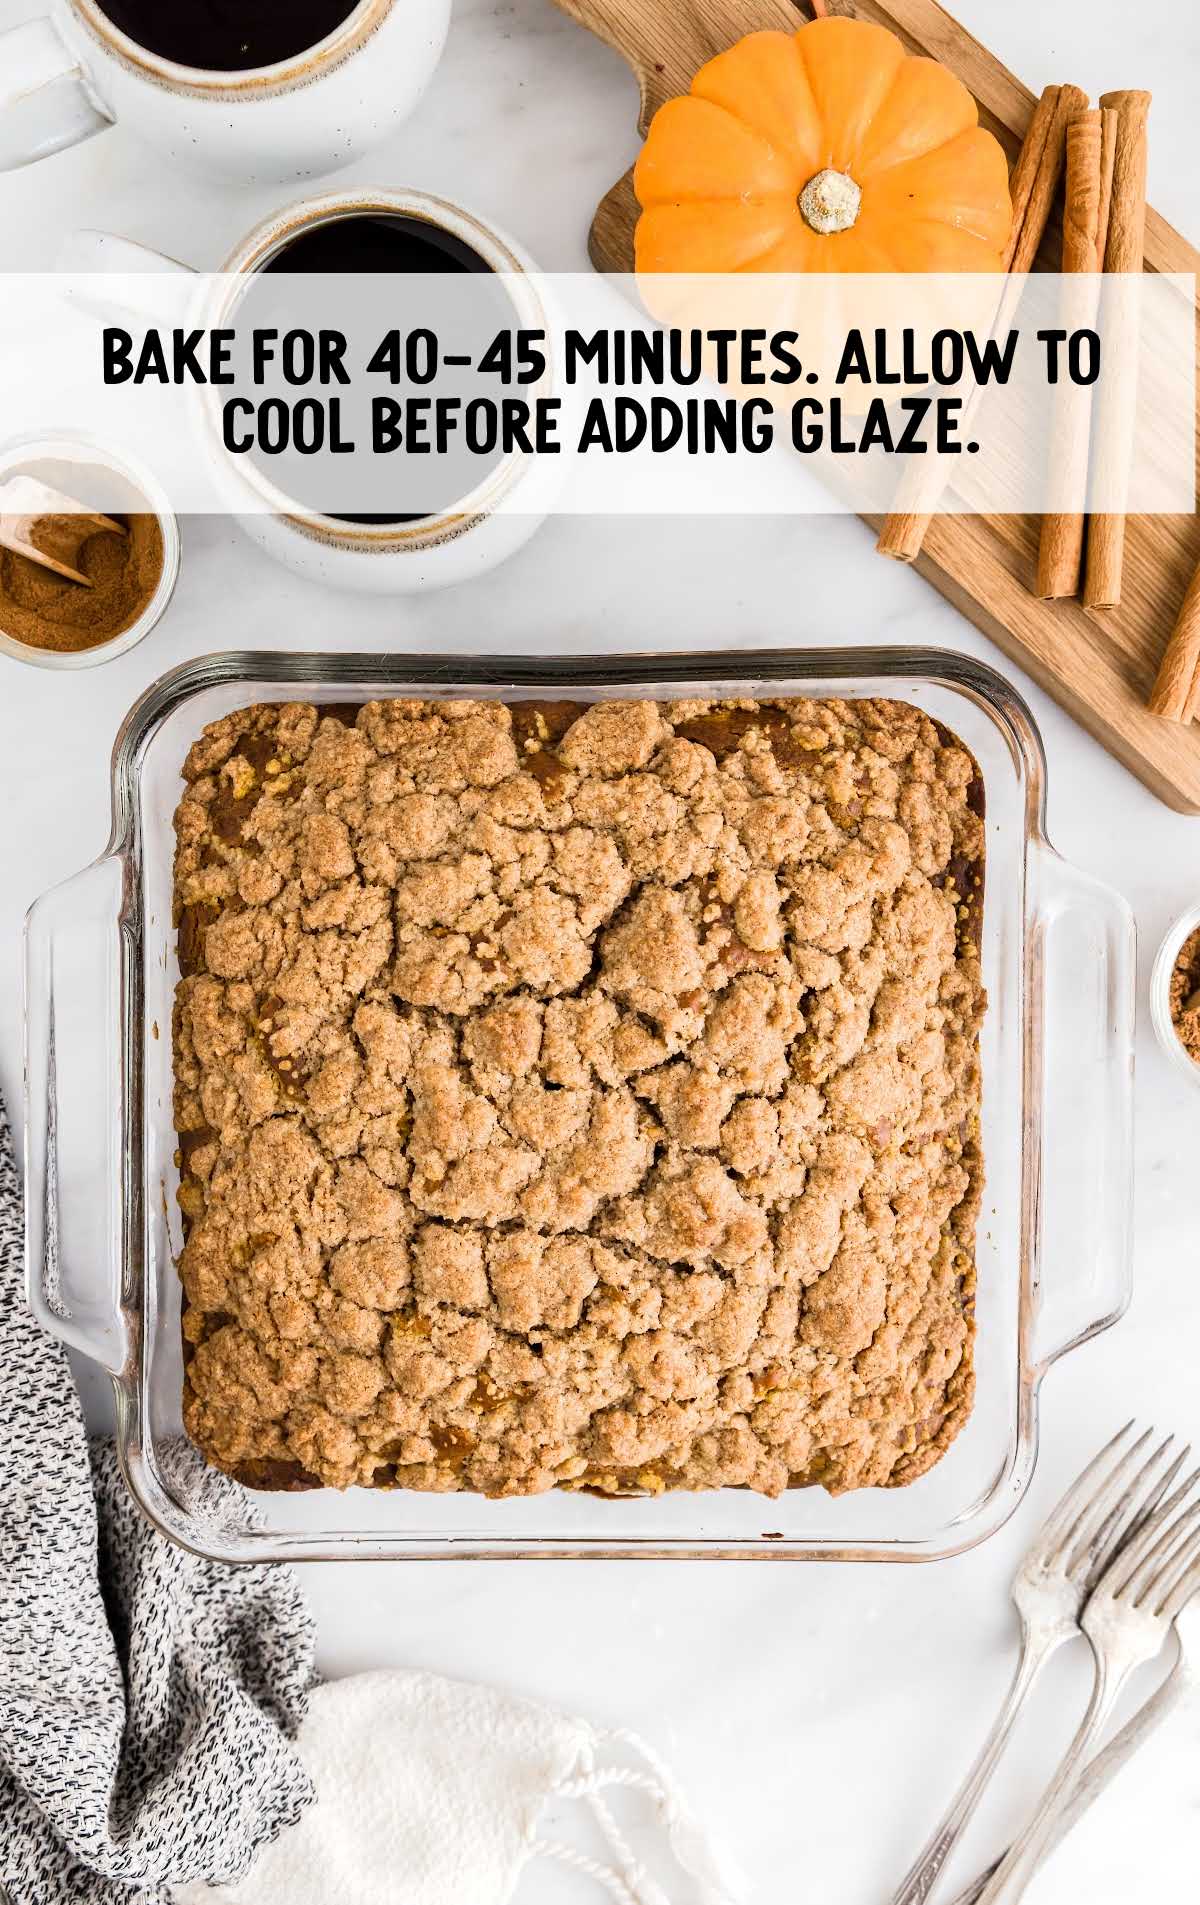 baked cake in a baking dish